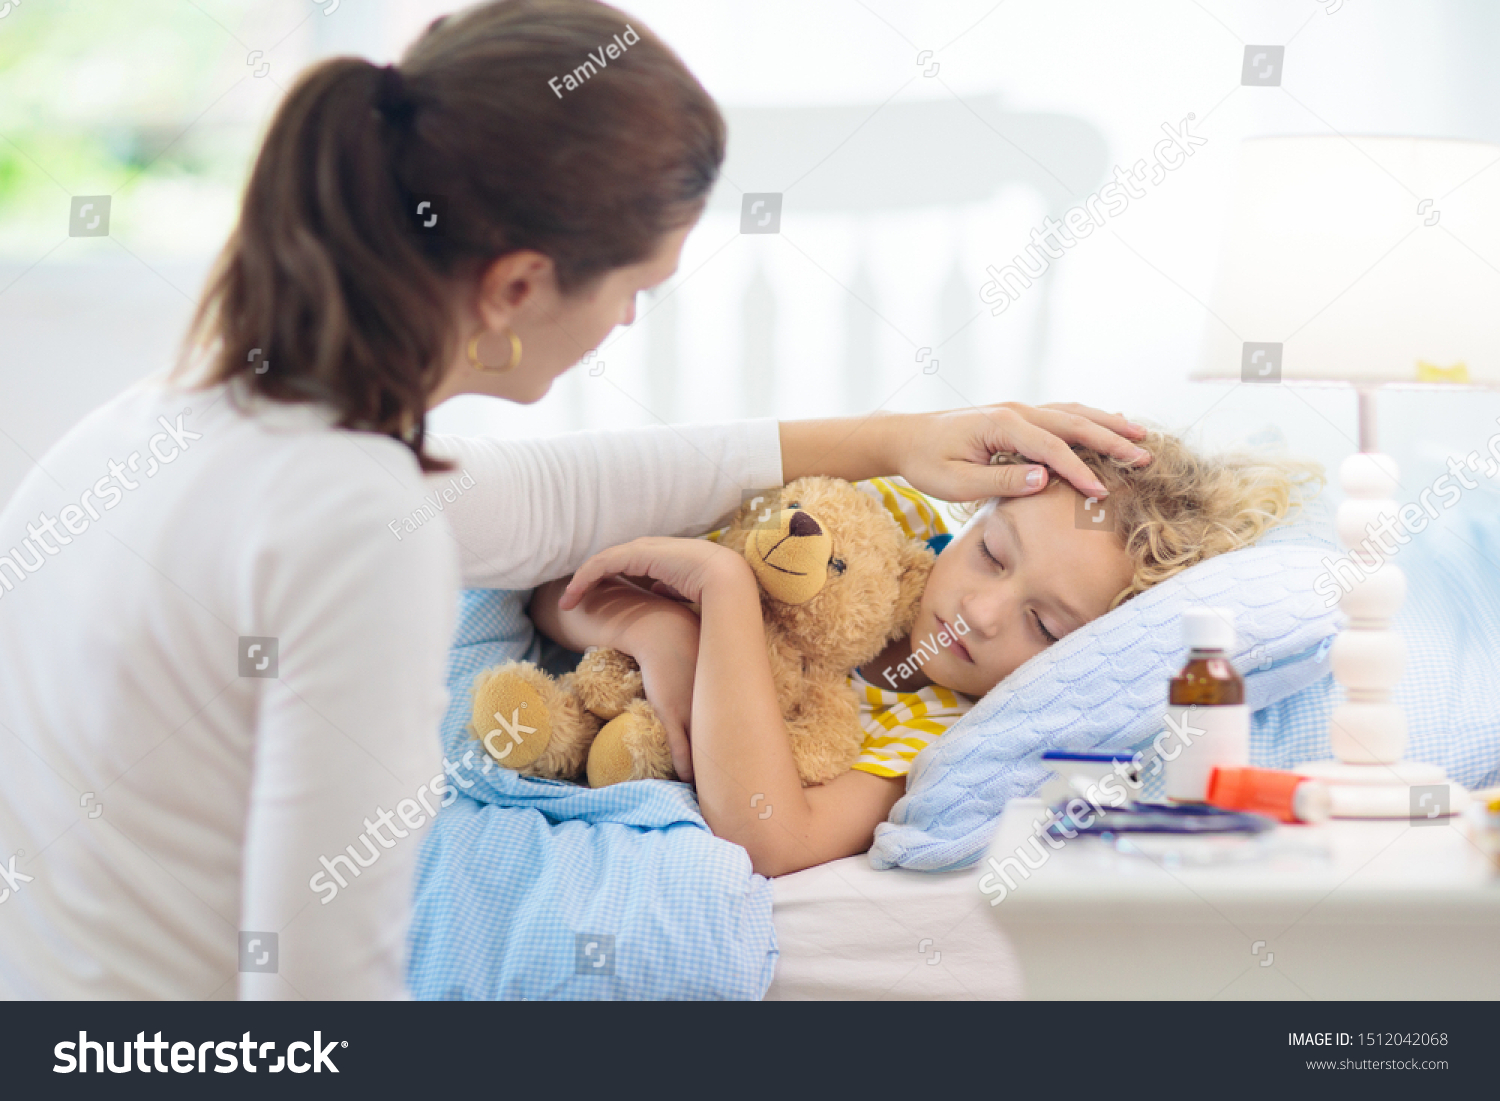 Sick little boy with asthma medicine. Mother with ill child lying in bed. Unwell kid with chamber inhaler for cough treatment. Flu season. Parent in bedroom or hospital room for young patient.  #1512042068